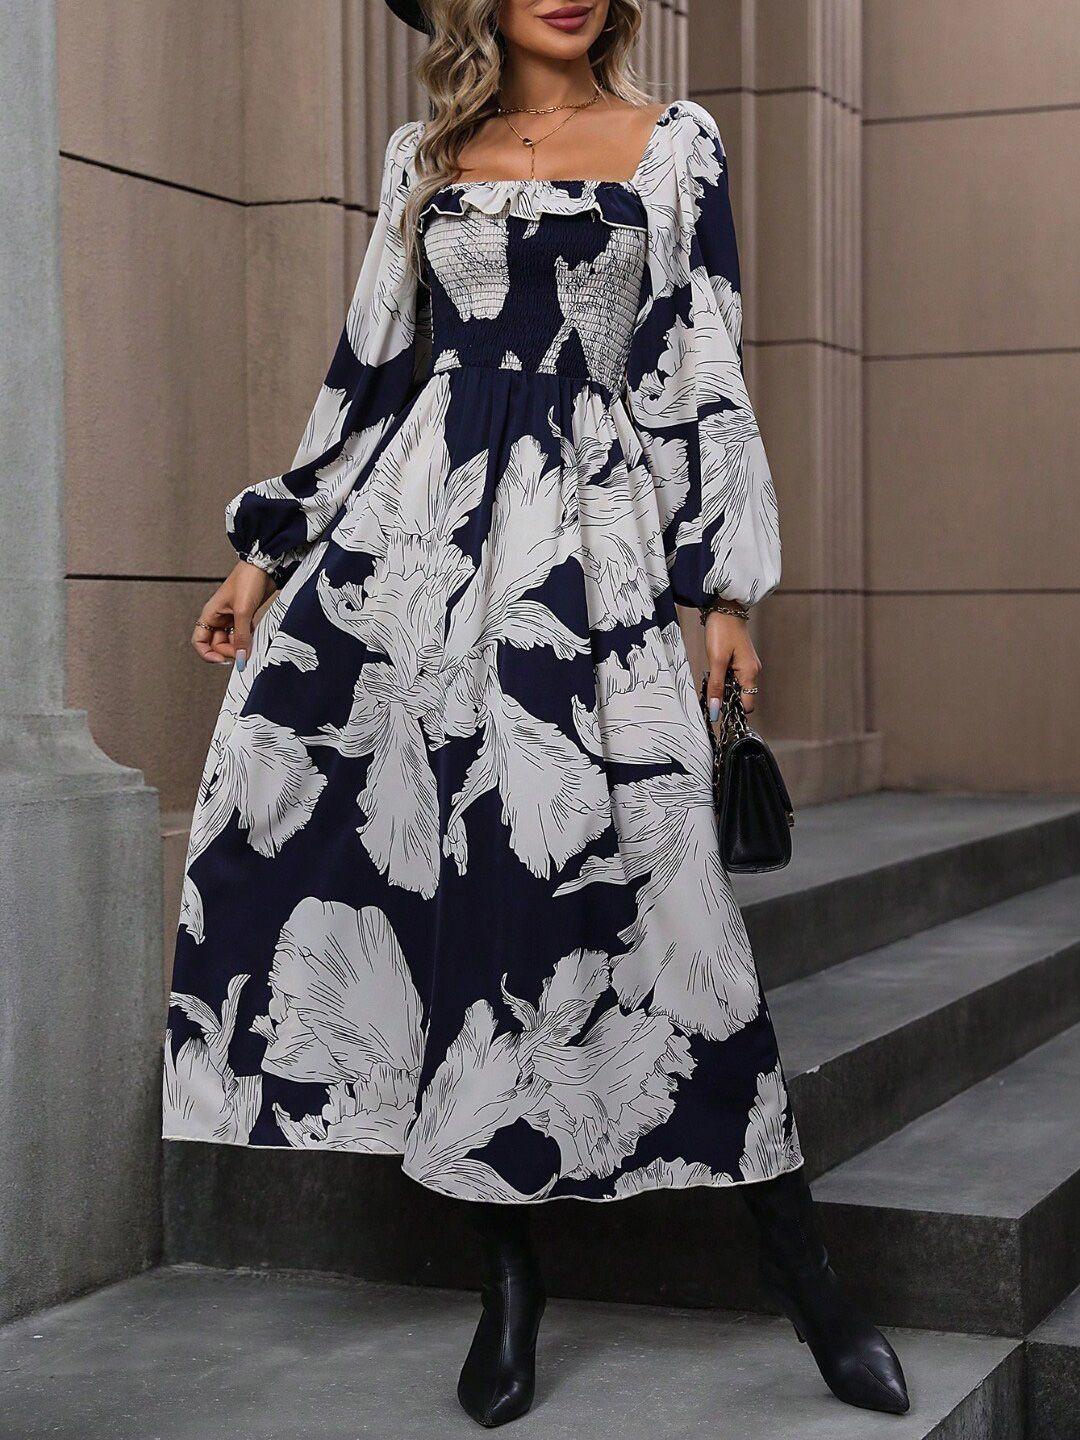 stylecast-x-kpop-black-floral-printed-square-neck-puff-sleeve-smocked-fit-&-flare-dress